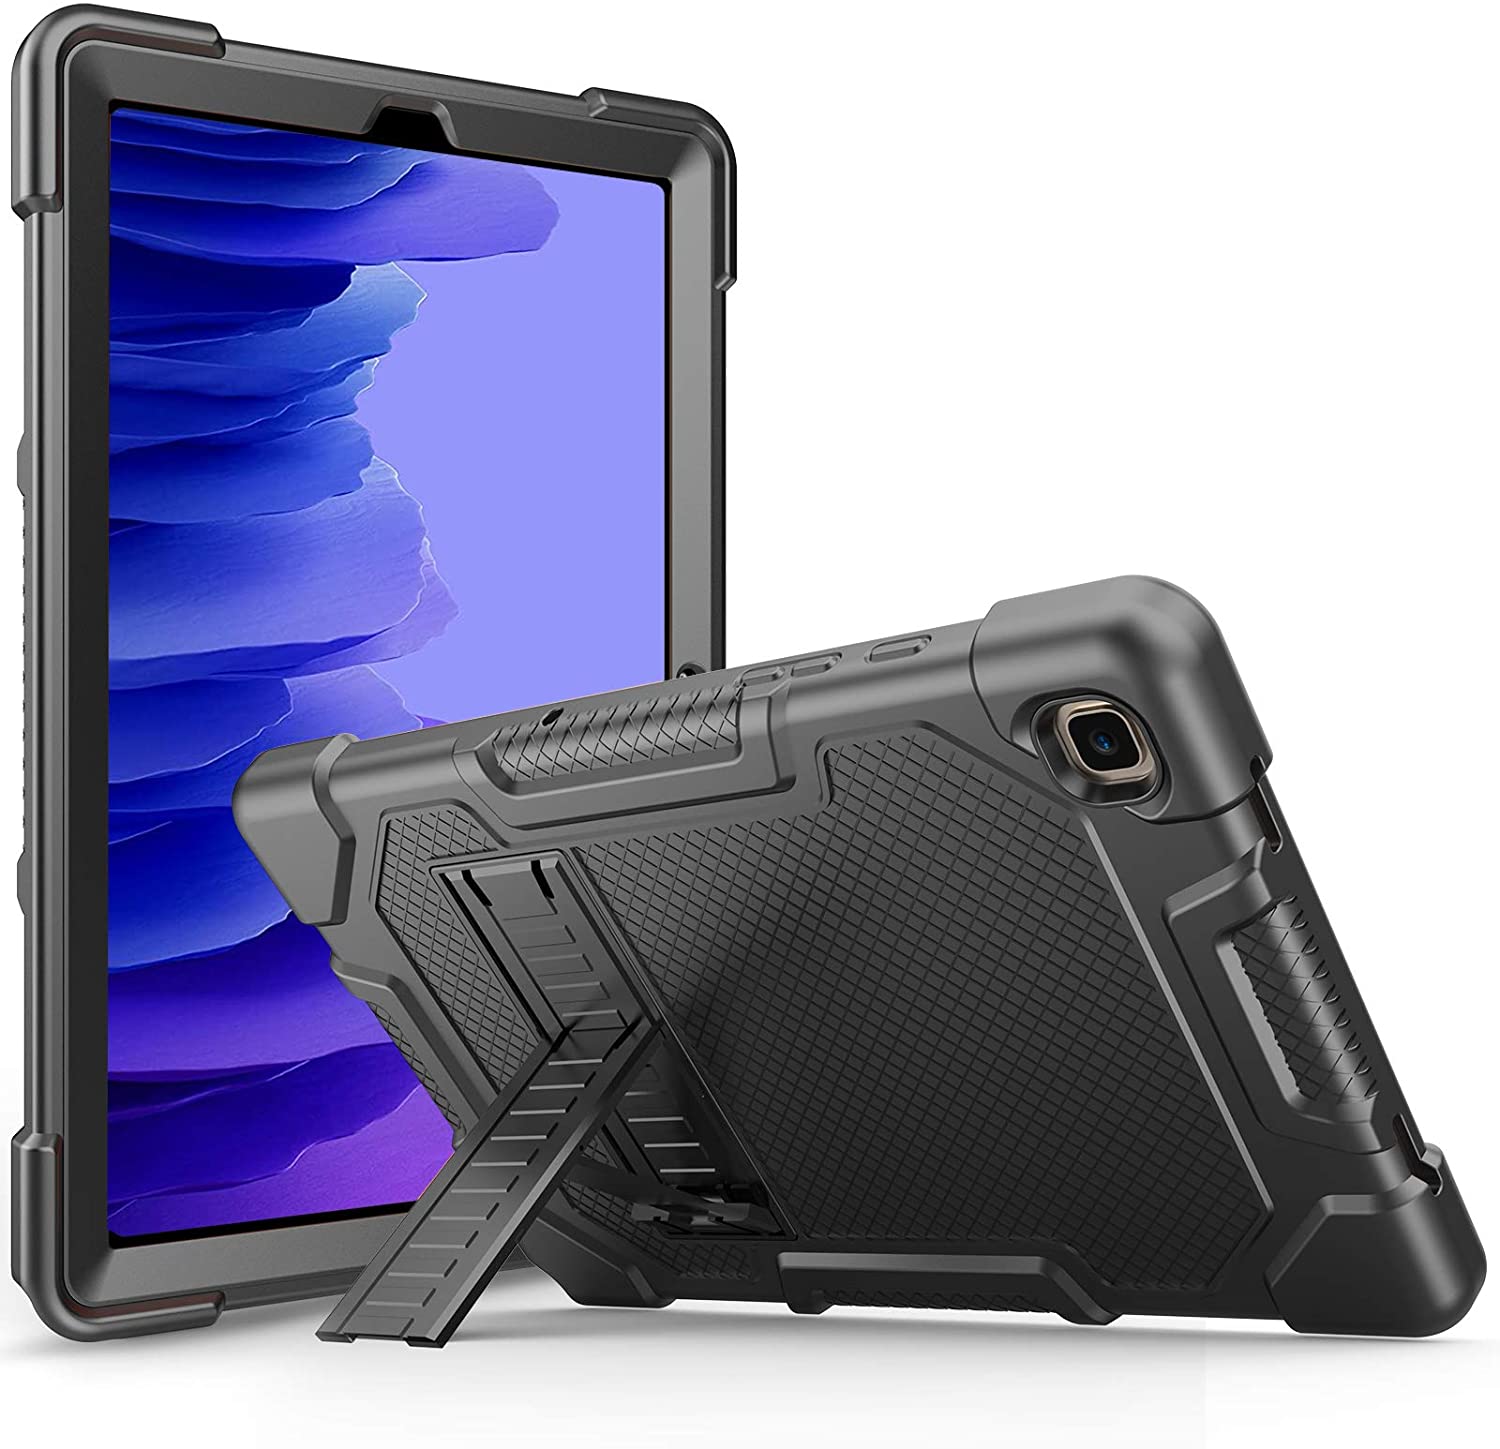 Galaxy Tab A7 10.4 inch 2020 Protective Case | Procase